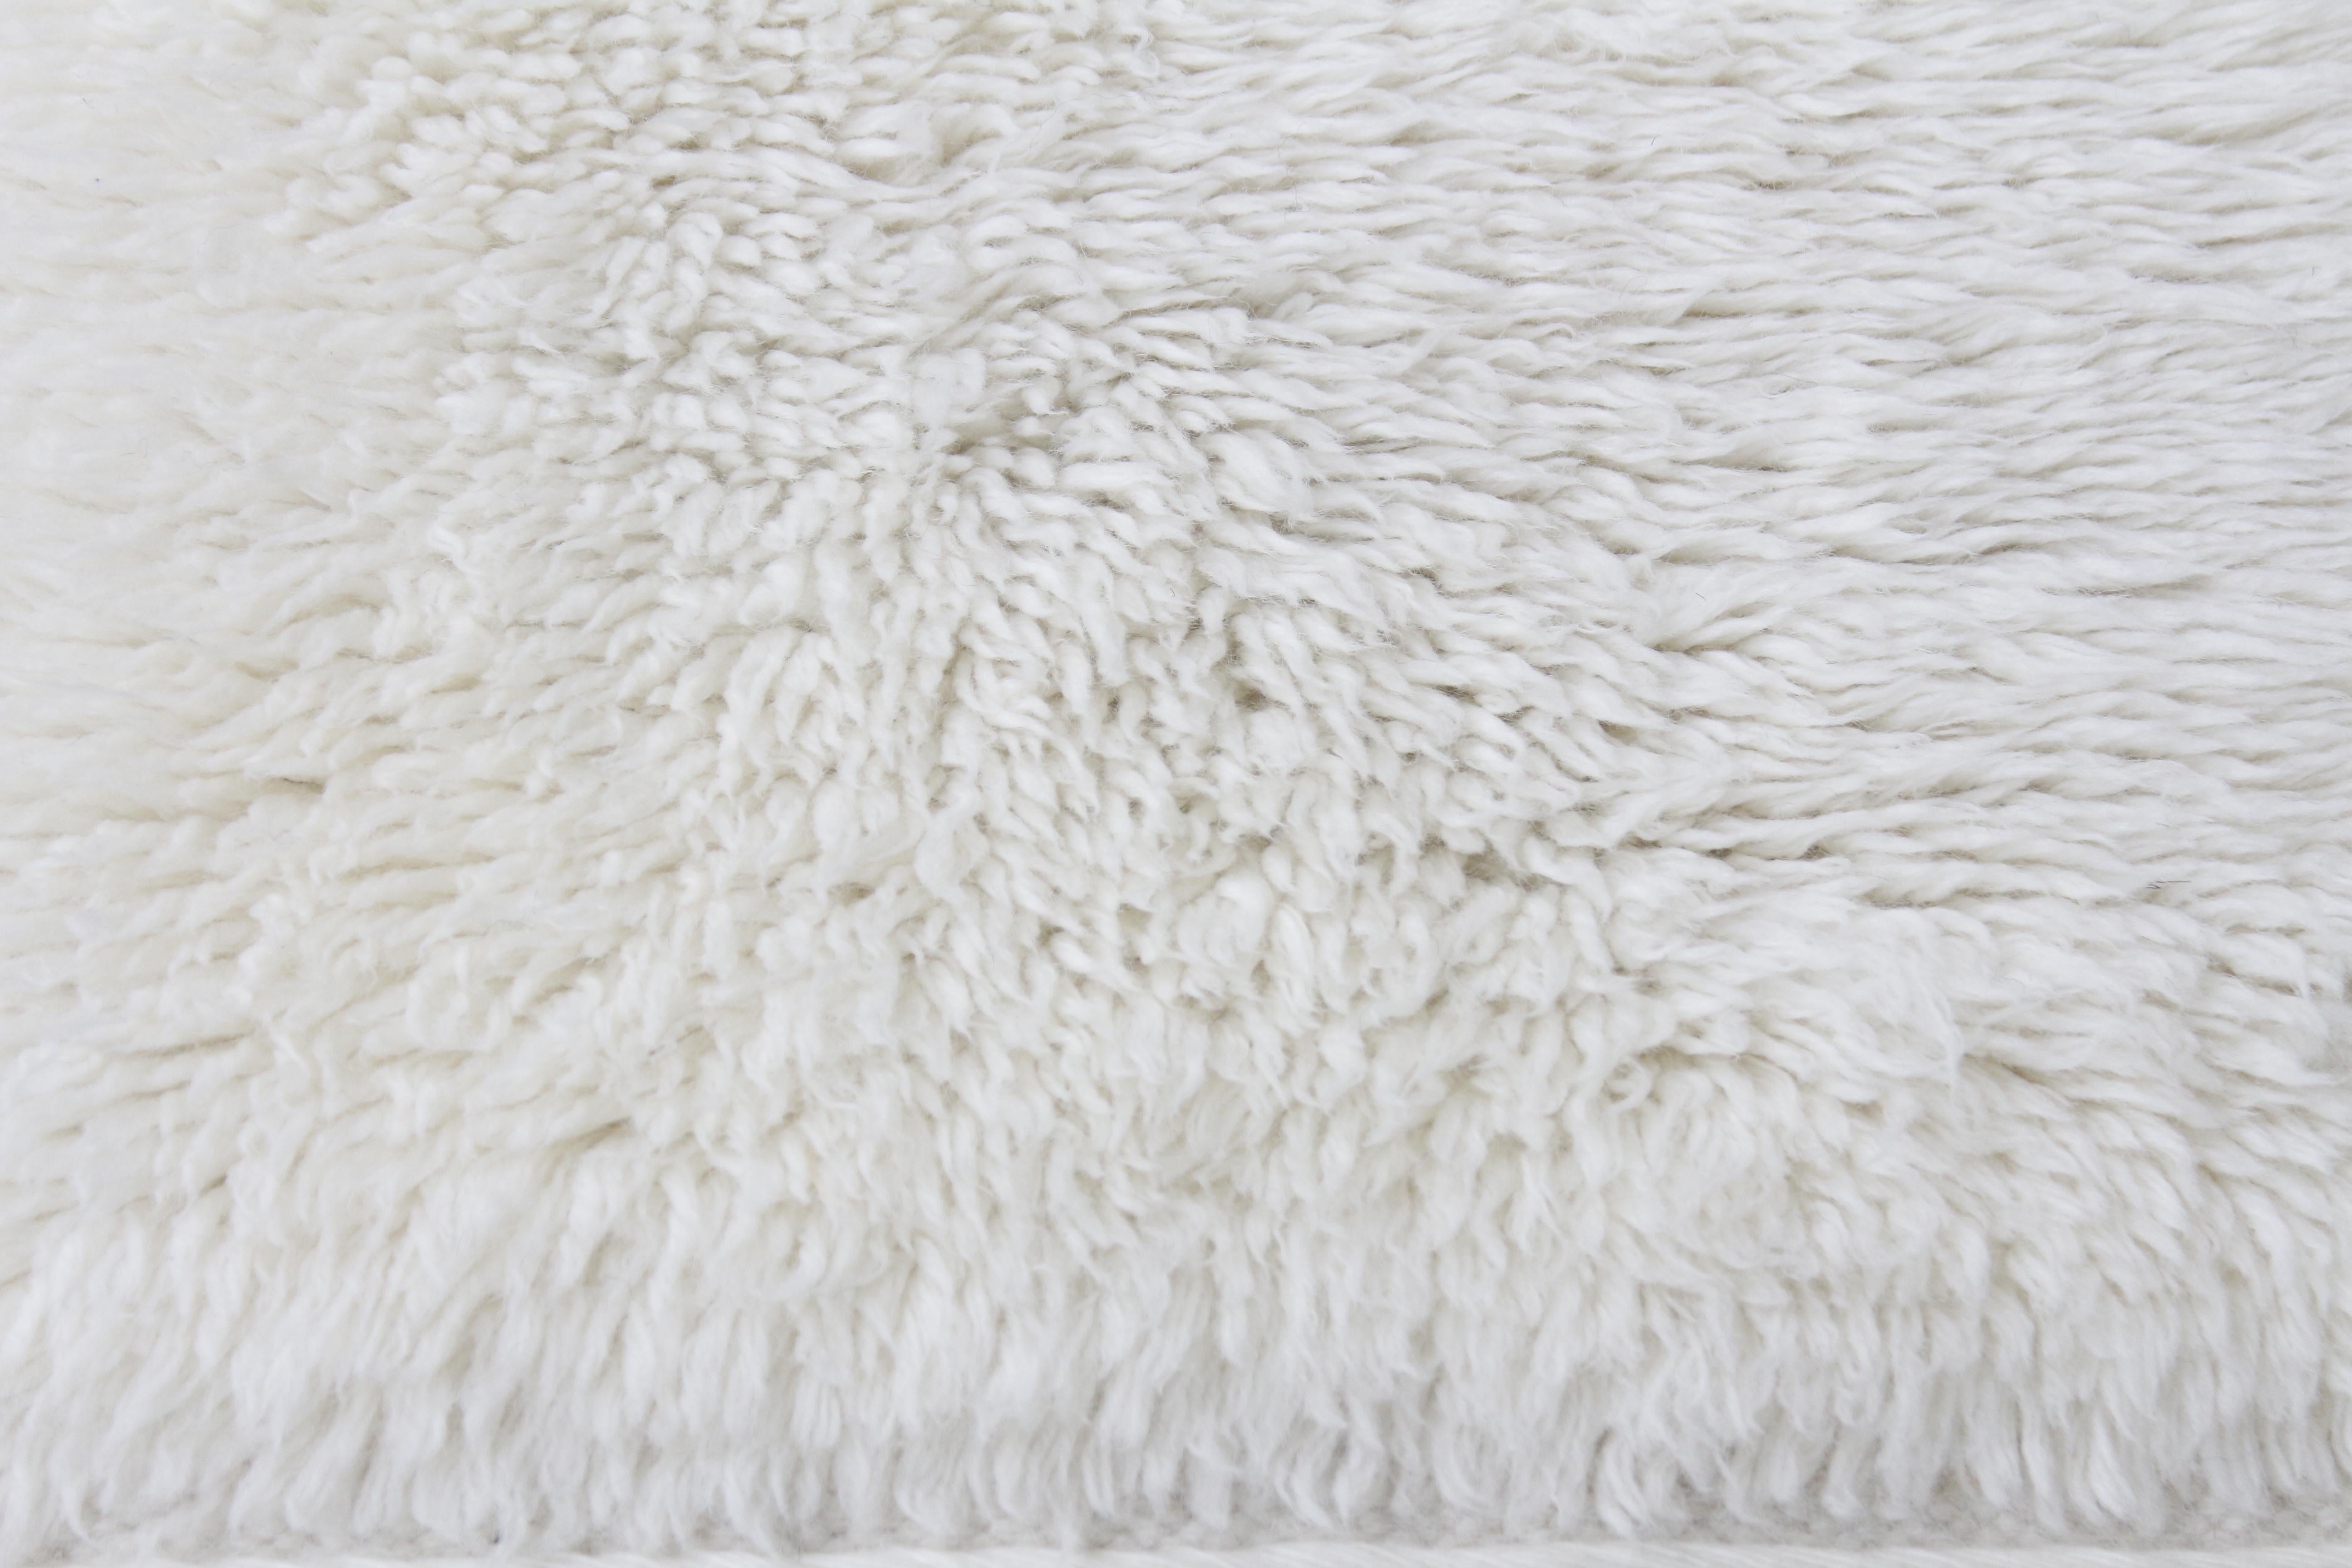 This runner is hand-knotted in India with a selected fine hand-spun wool and inspired by Moroccan high pile rugs (like shaggy rugs). Very soft to touch and desirable to walk on or wake up as a bedside runner. The neutral tone of this rug help having